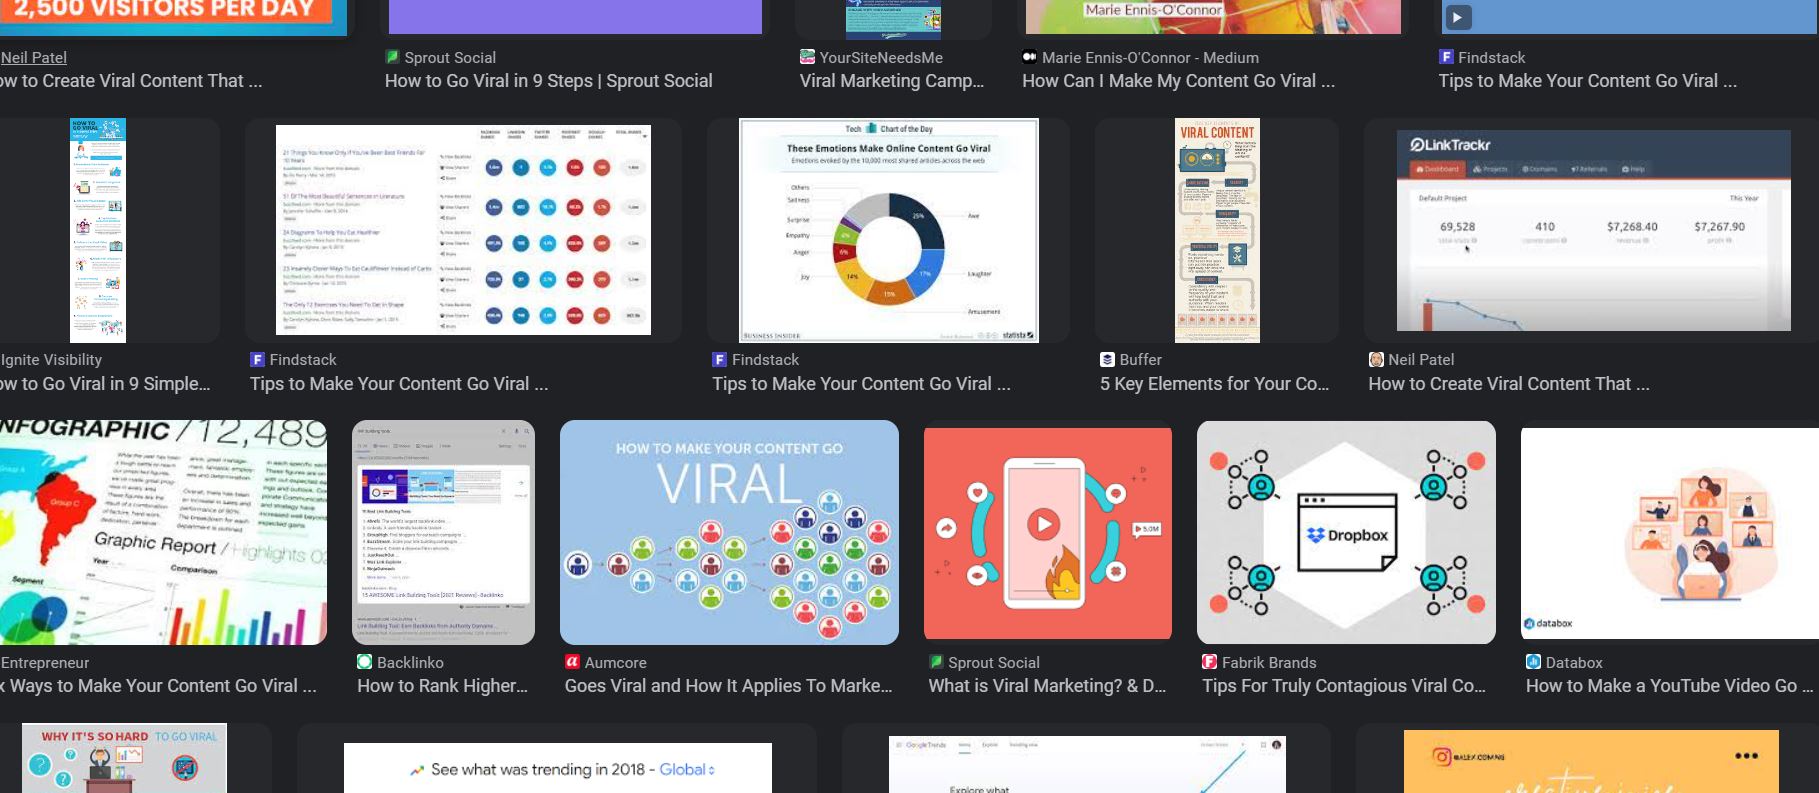 What Makes Content Go Viral?